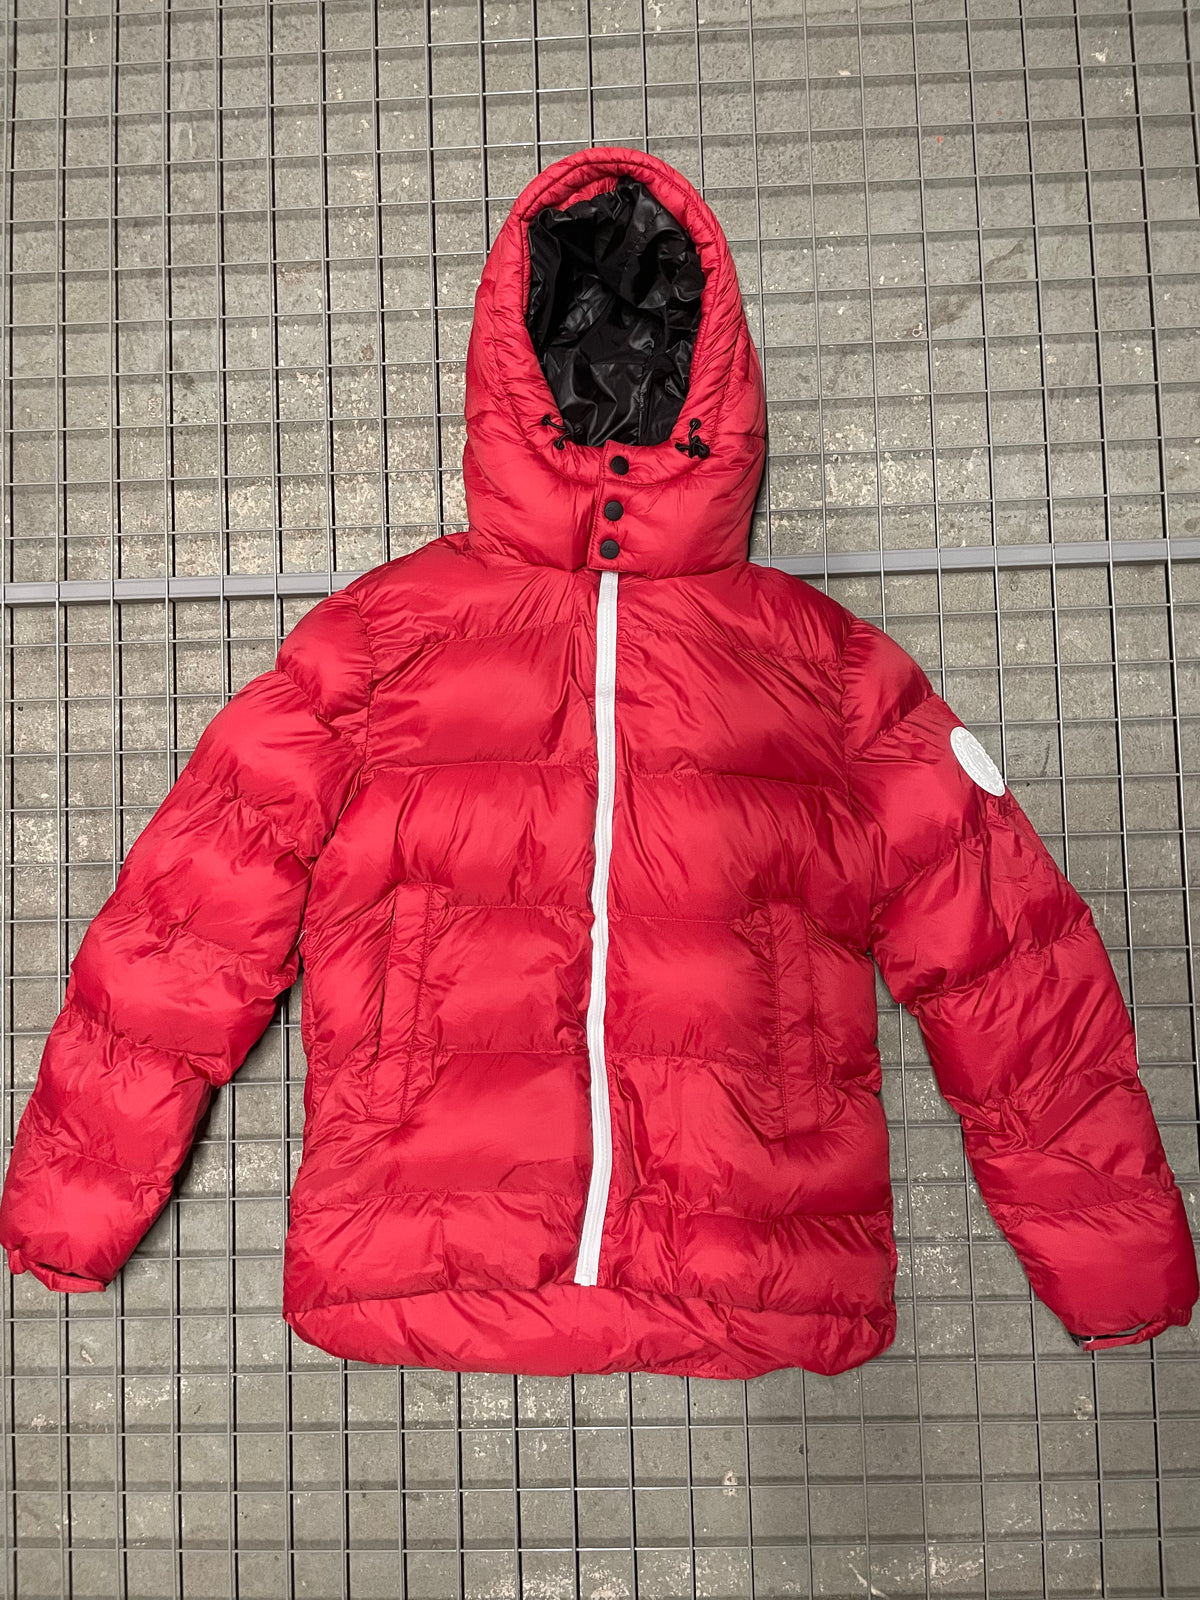 Contrast Puffer Jacket - Red (SAMPLE)